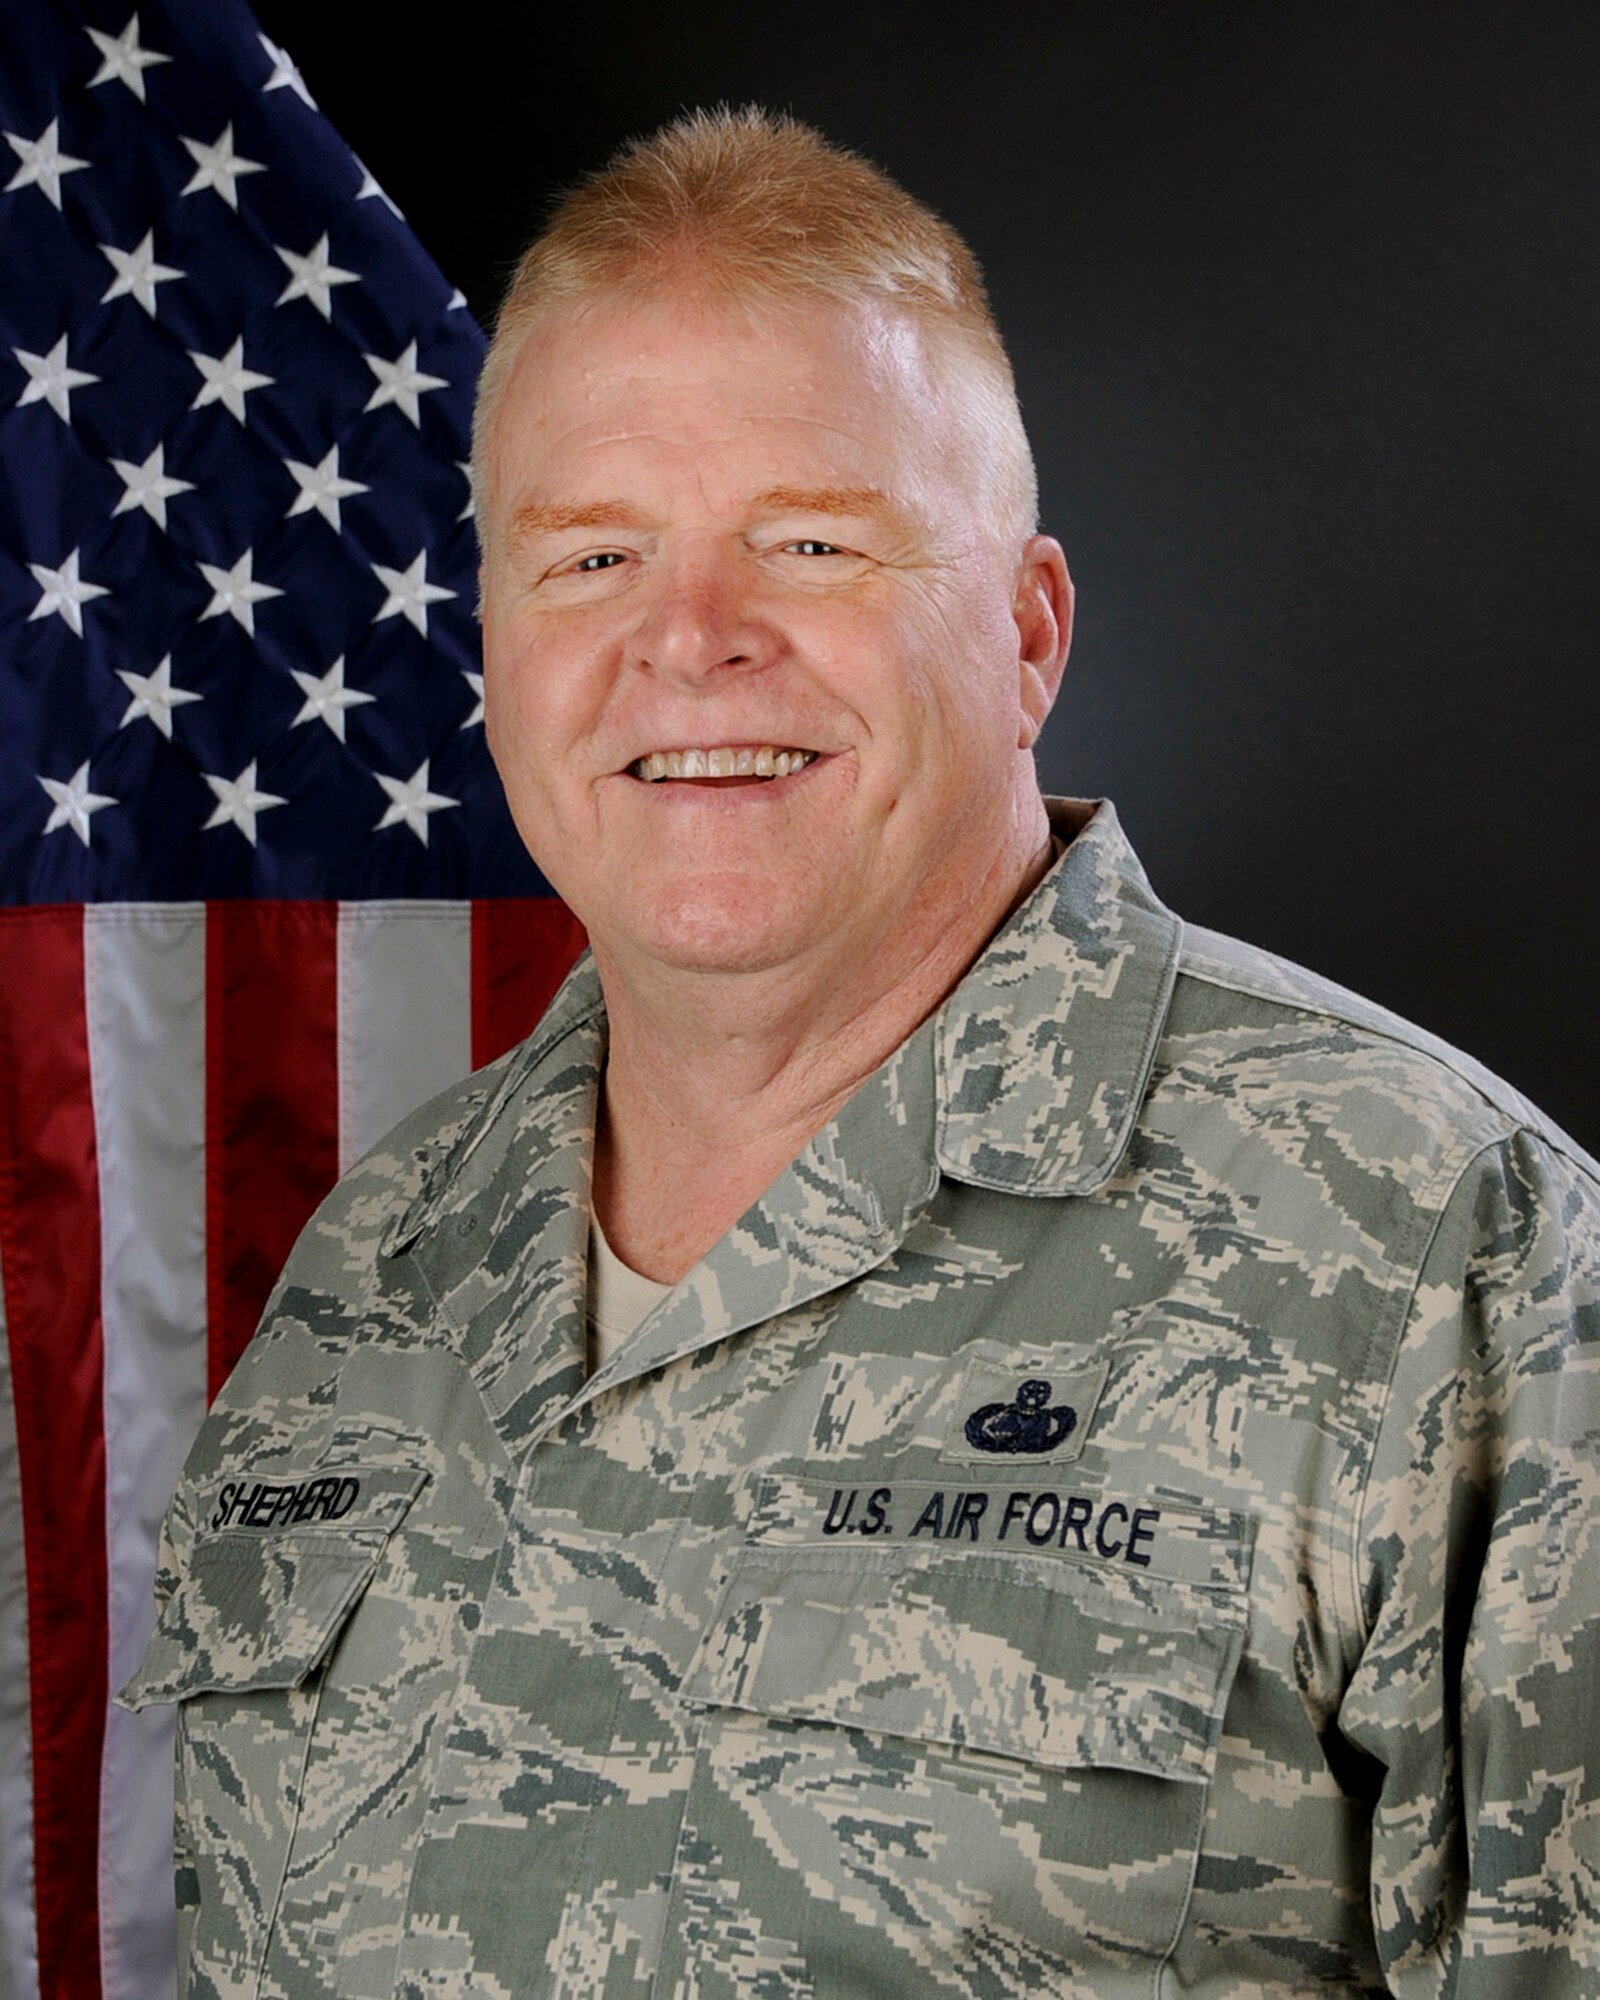 U.S. Air Force Chief Master Sgt. Lee Shepherd, 169th Fighter Wing Safety and Occupational Health Manager with the 169th Operations Group, South Carolina Air National Guard at McEntire Joint National Guard Base, April 28, 2015.  (U.S. Air National Guard photo by Tech. Sgt. Caycee Watson/Released)